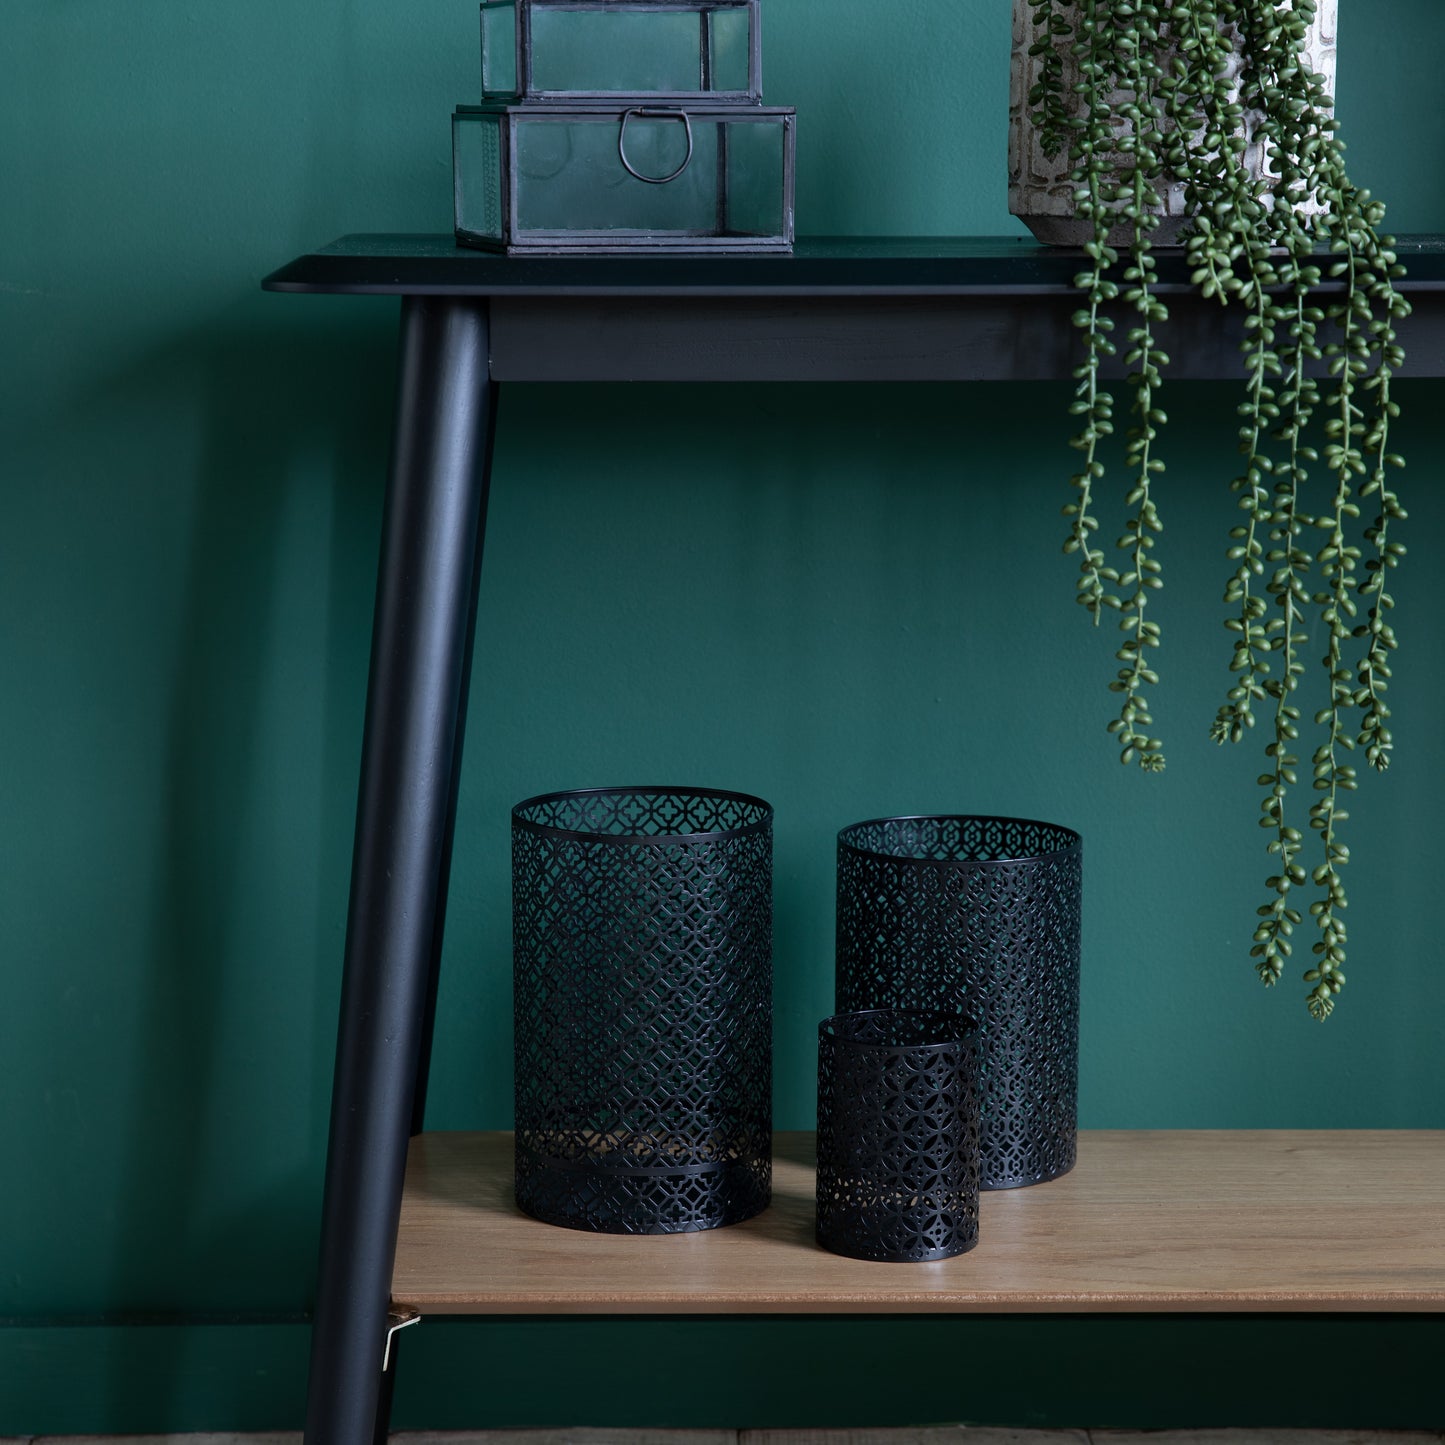 A black Maddox Console Table with Shelf from Kikiathome.co.uk adorned with two vases and a plant, perfect for interior decor.